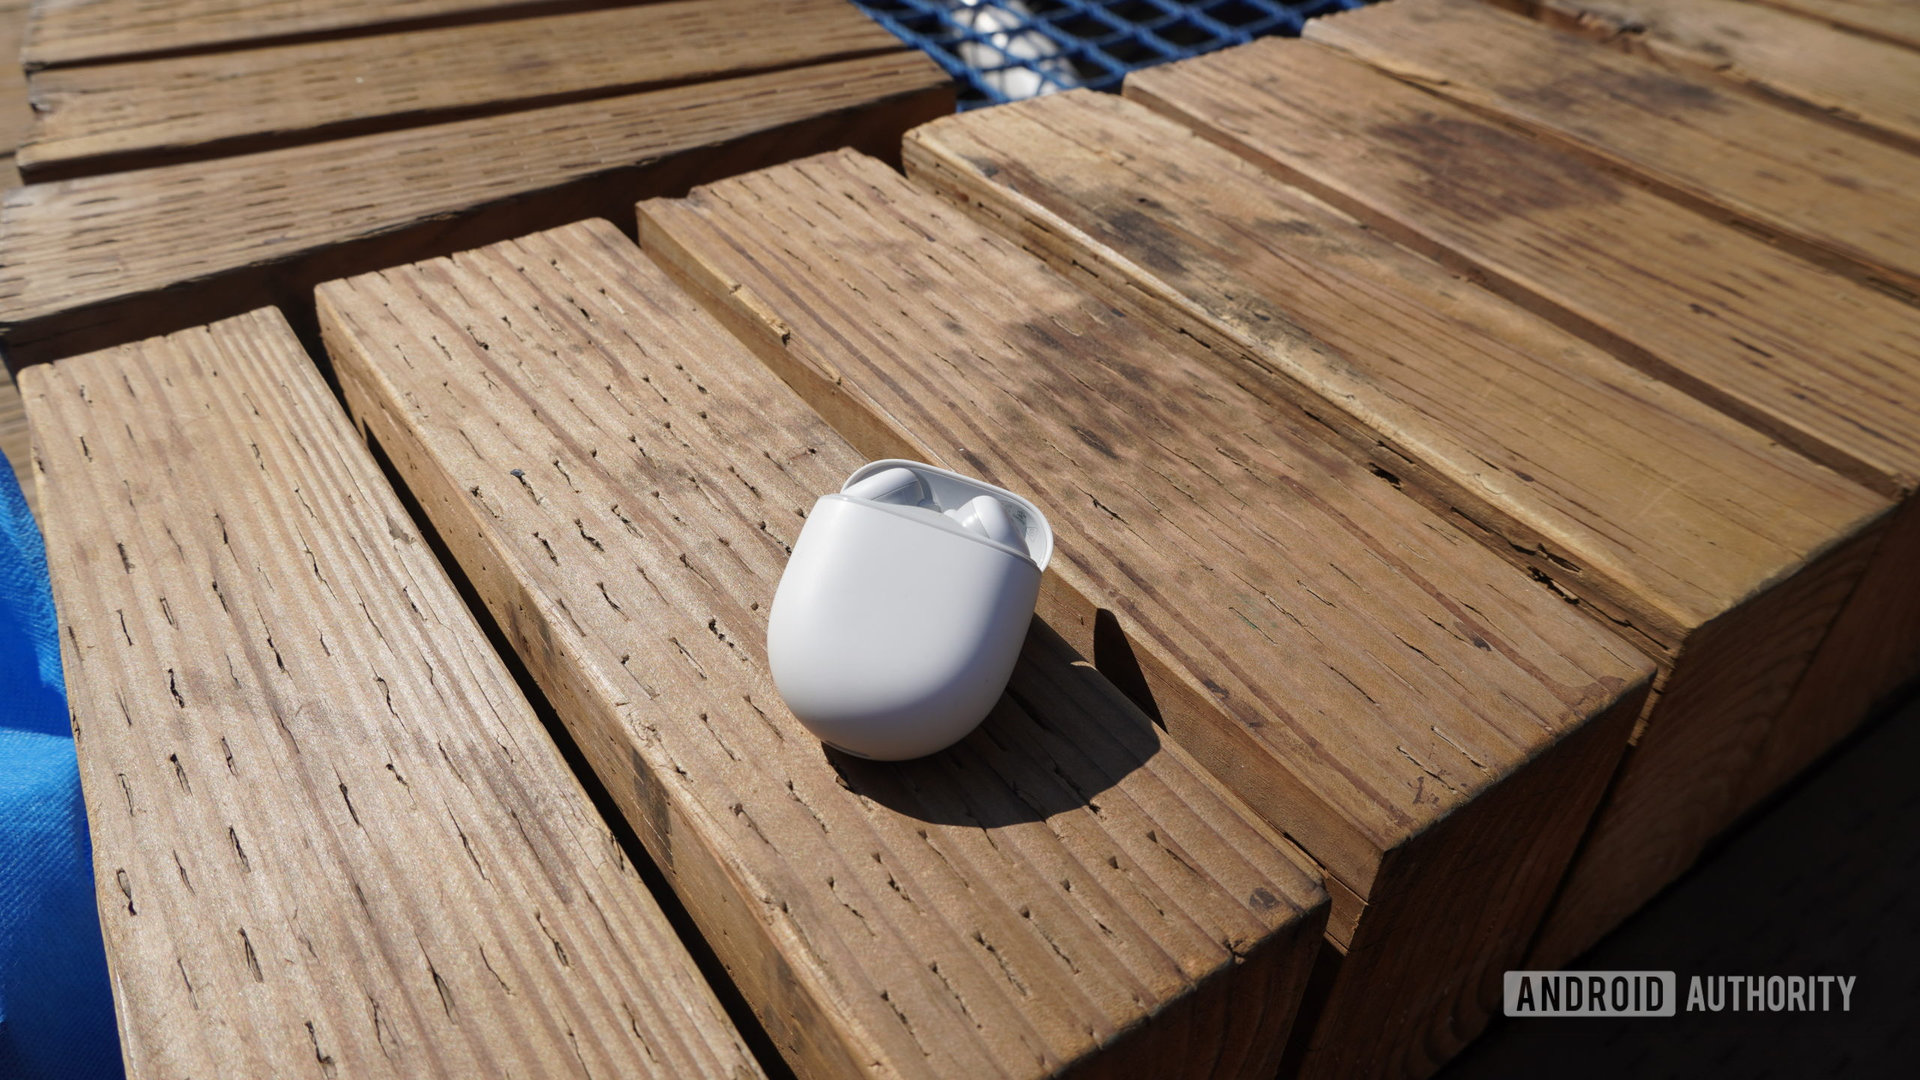 The Pixel Buds A-Series earbuds in their case sitting on a wooden bench outdoors.